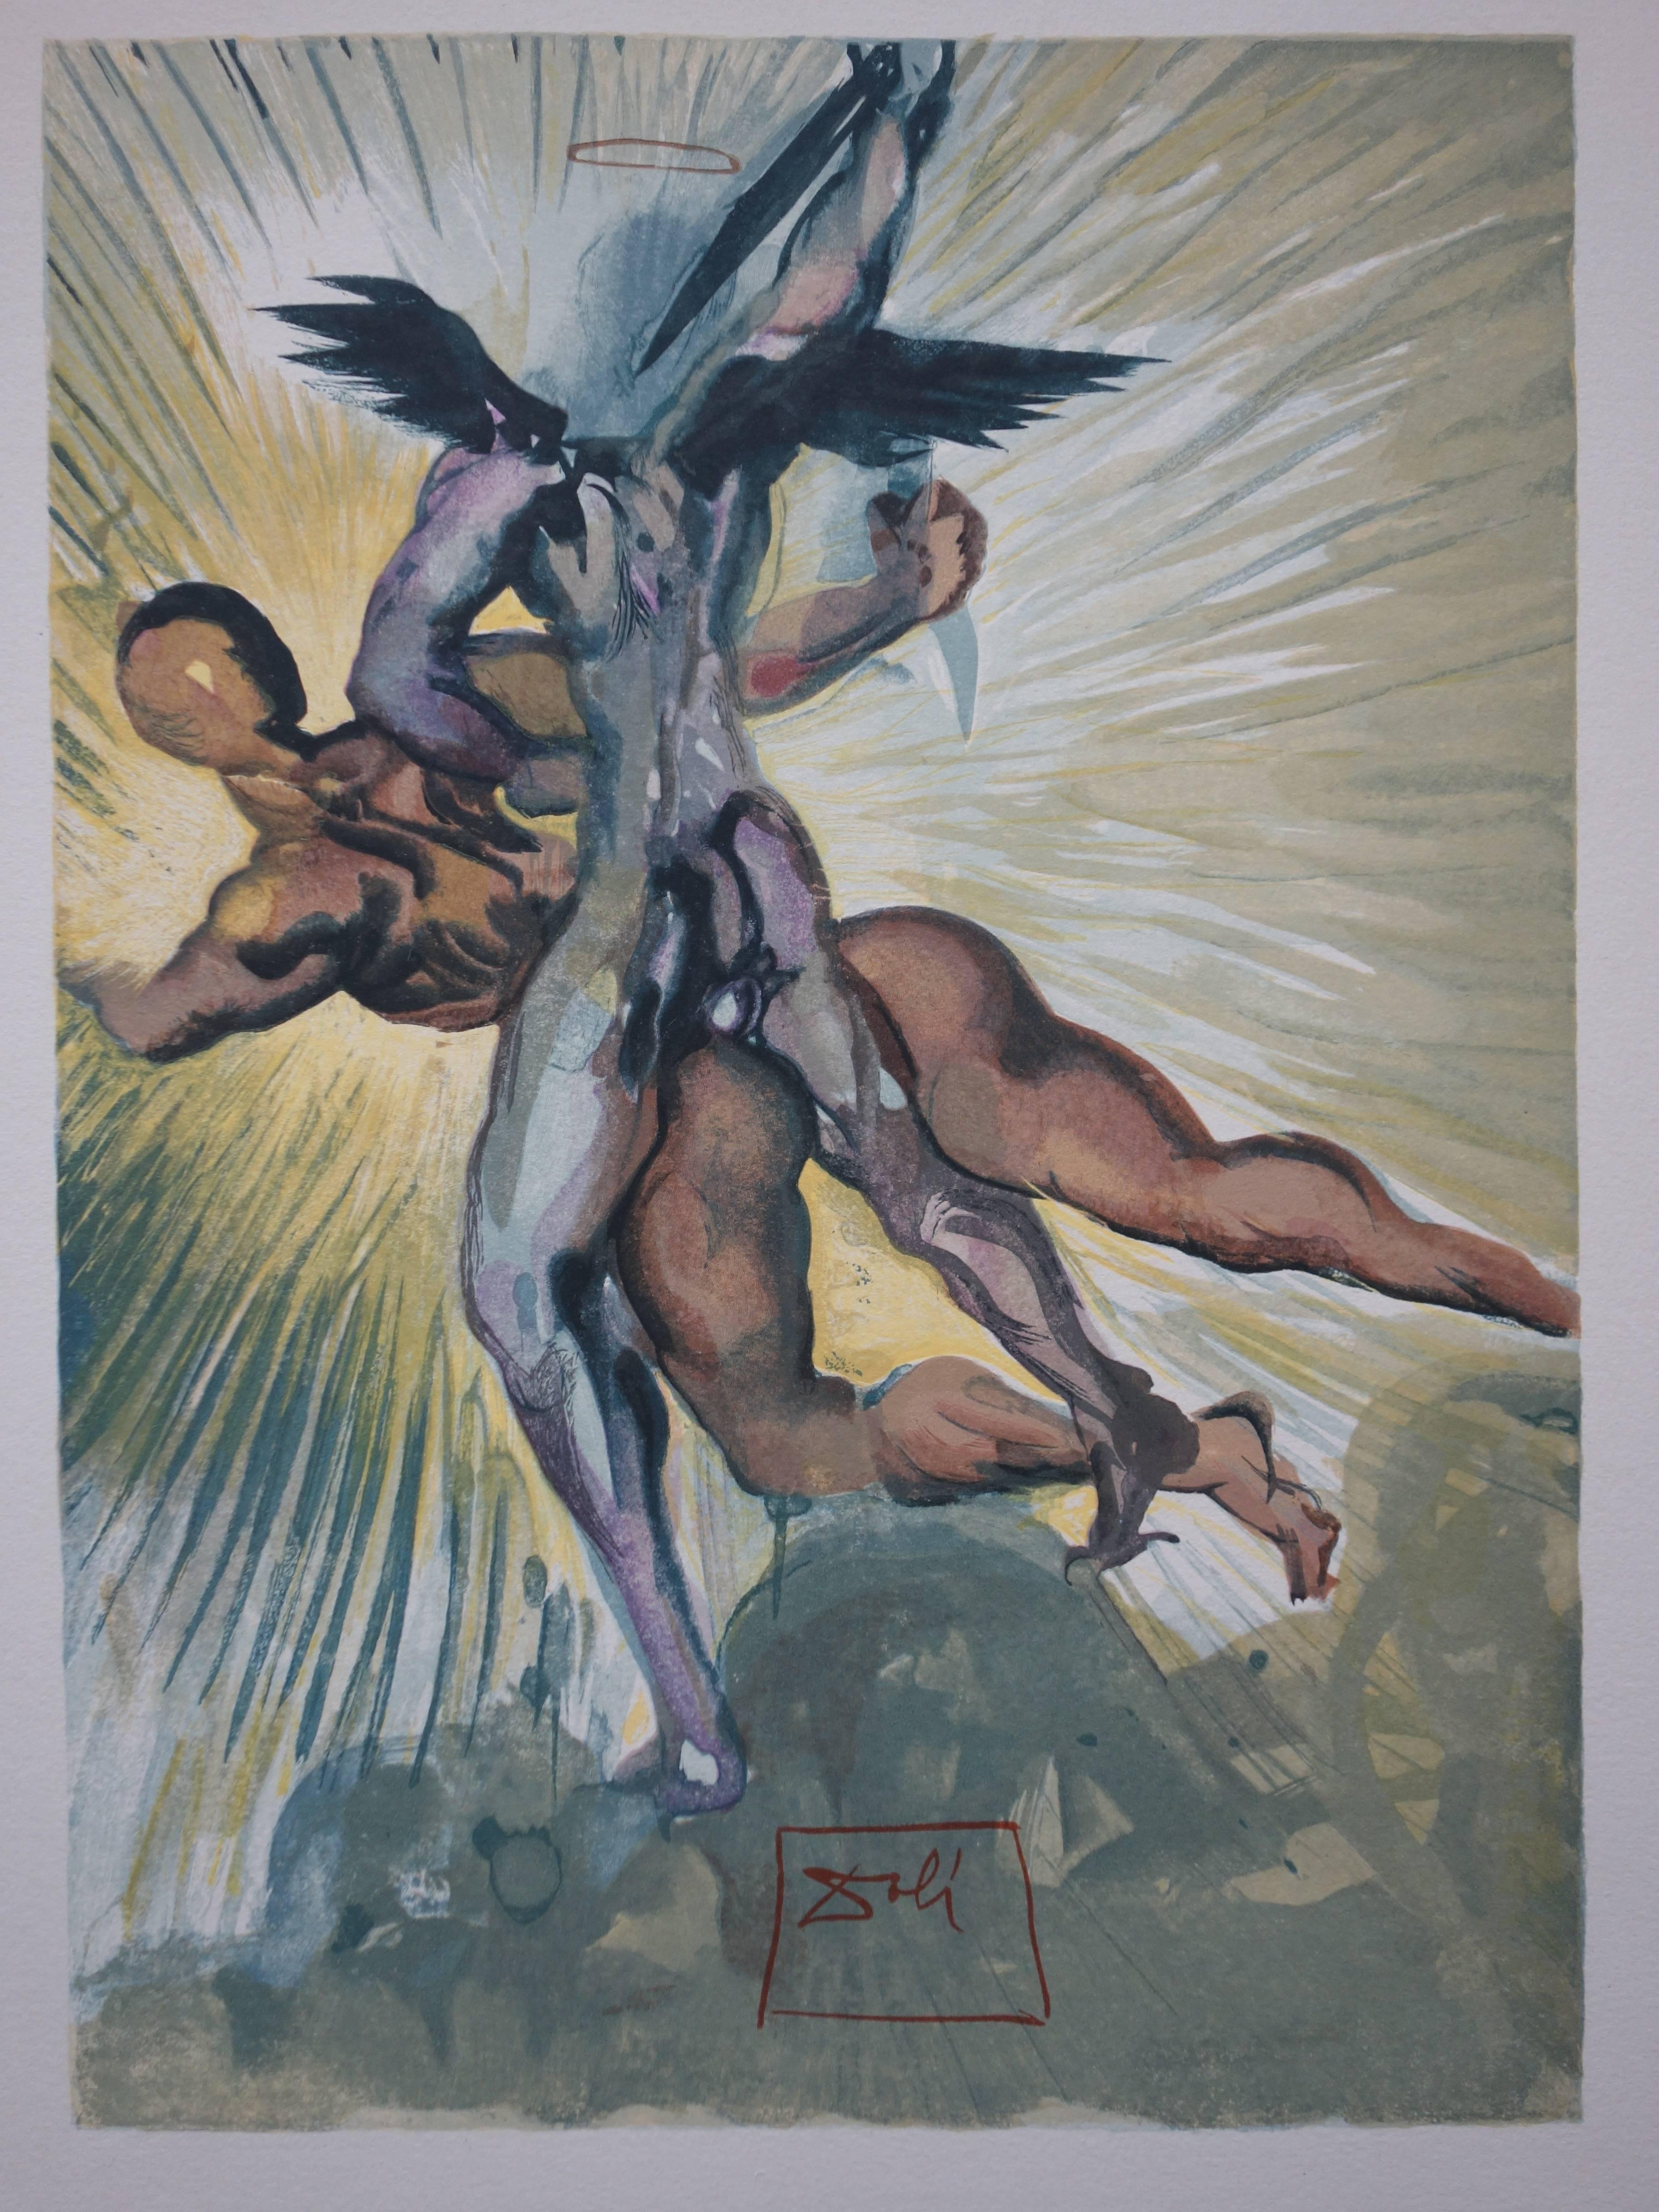 Purgatory 8 - The Guardian Angels of the Valley - woodcut - 1963 - Post-Impressionist Print by Salvador Dalí